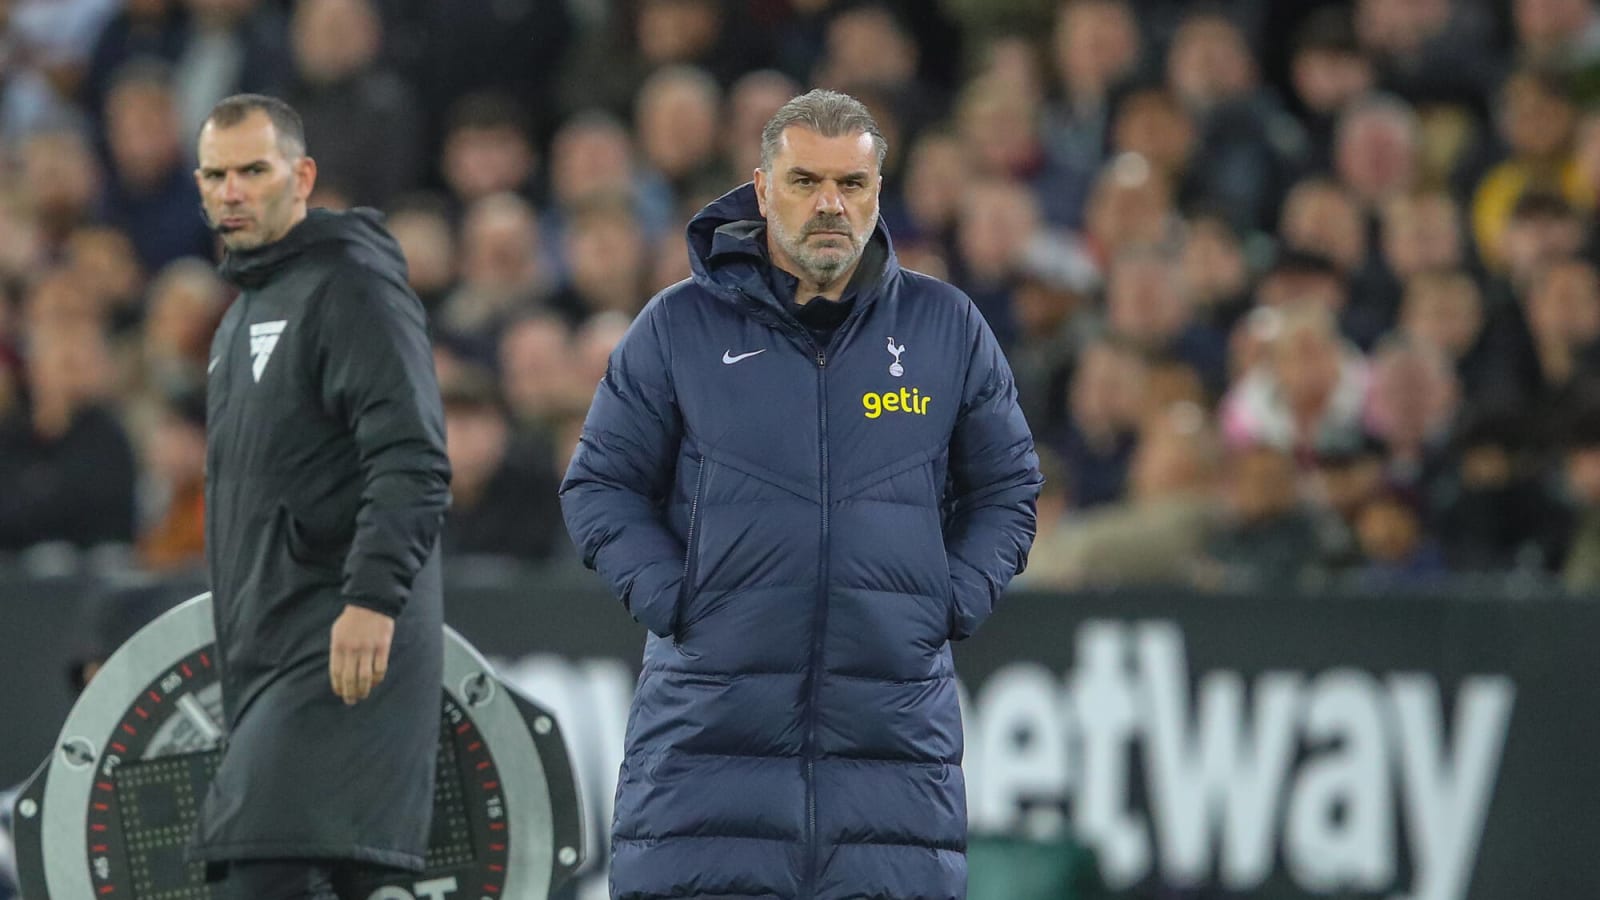 'That’s one me' – Tottenham man takes the blame after defeat to Chelsea